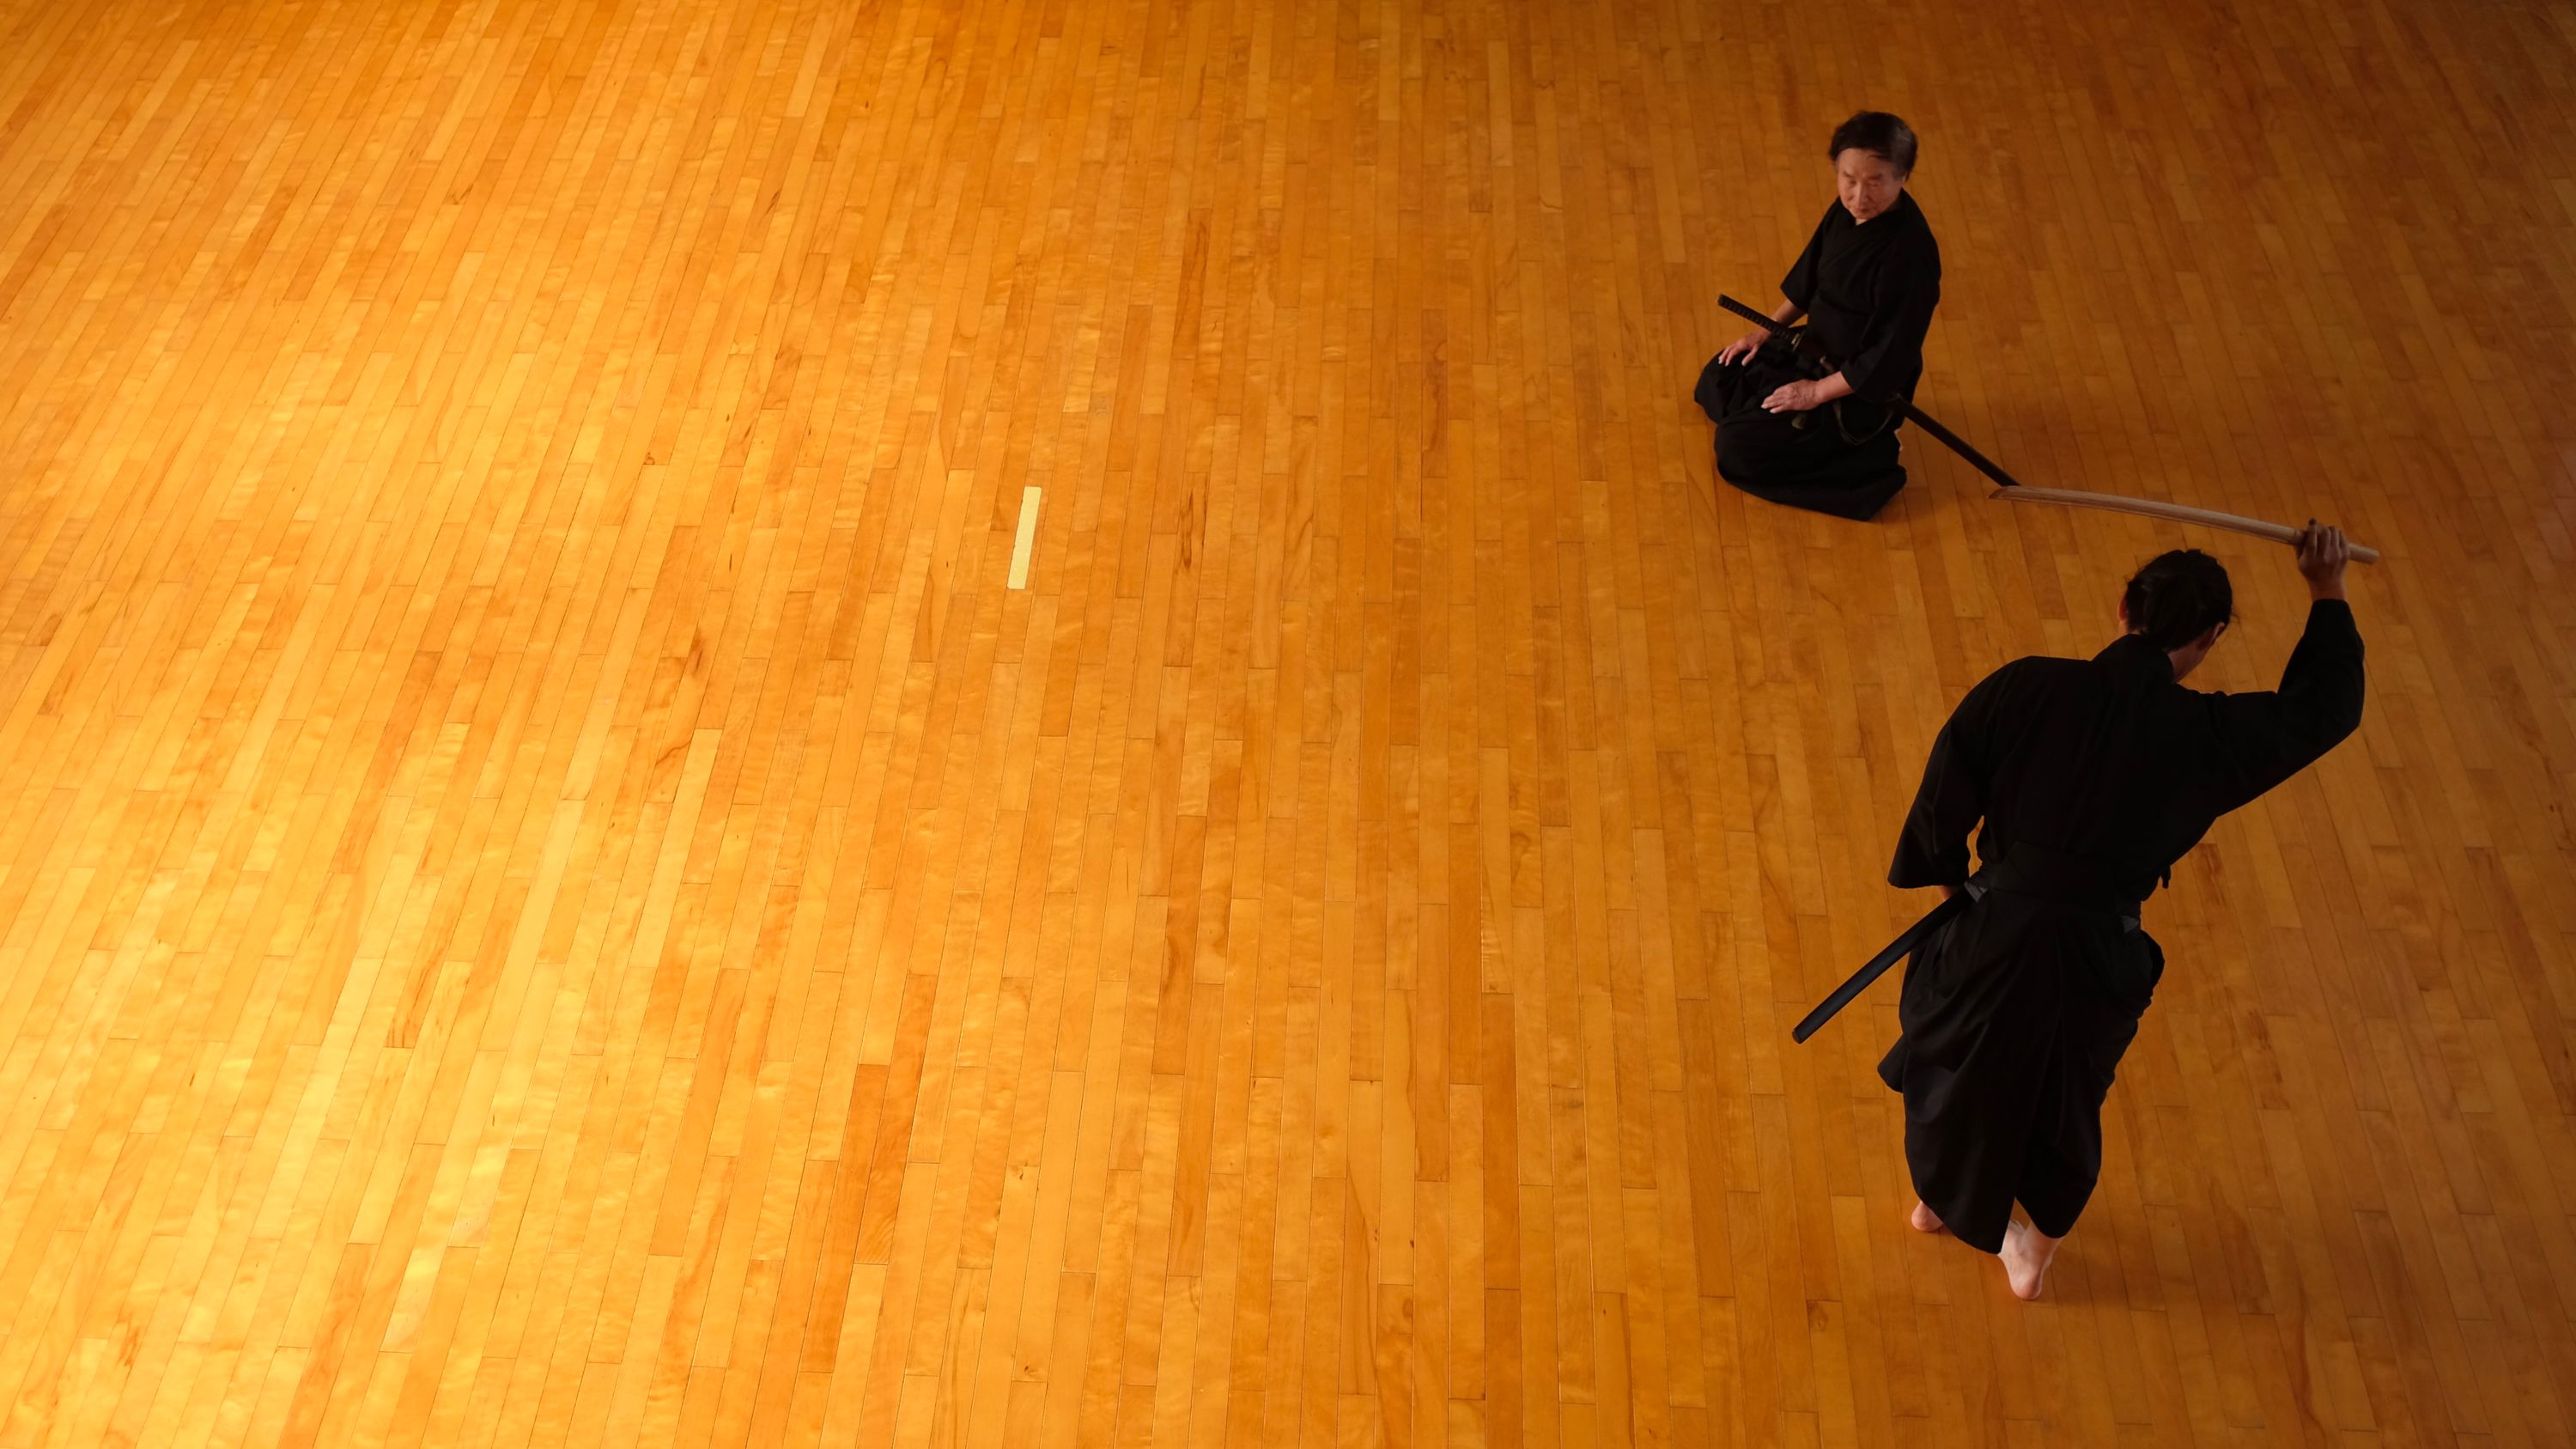 Two Japanese men dressed in hakama, Japanese martial arts clothes, train with Japanese swords on a parquet floor.